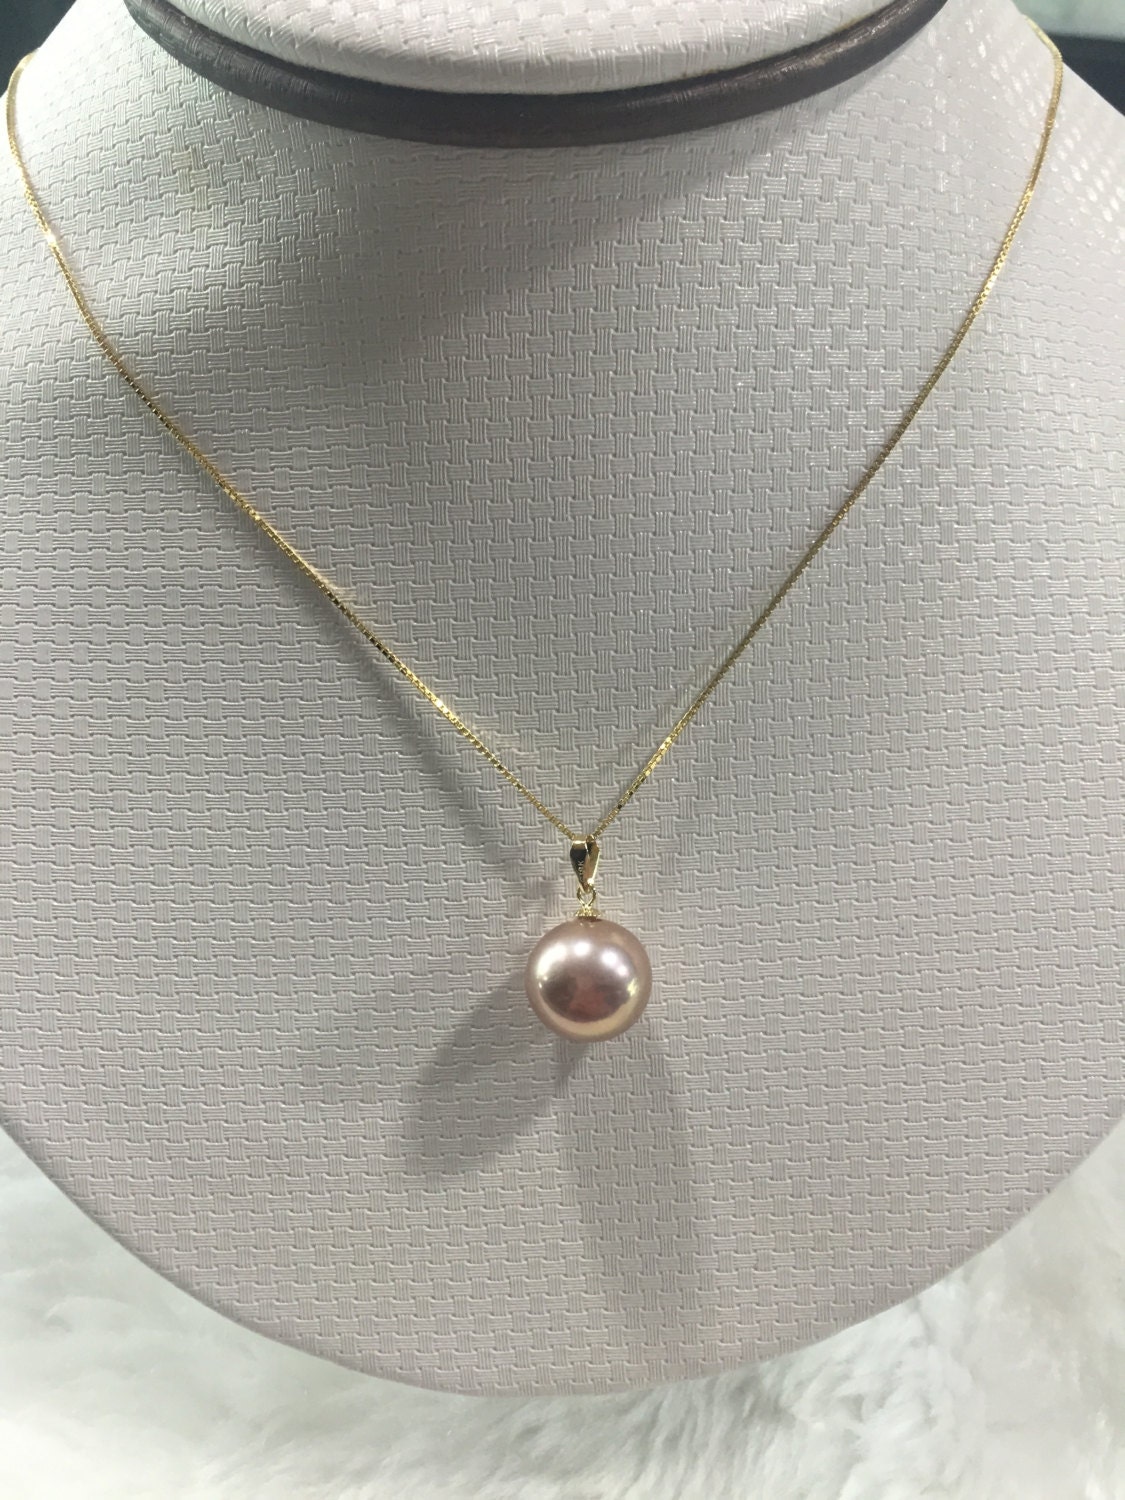 Fresh Water Pearl 18k Gold Necklace Pendant Chain Wedding | Etsy